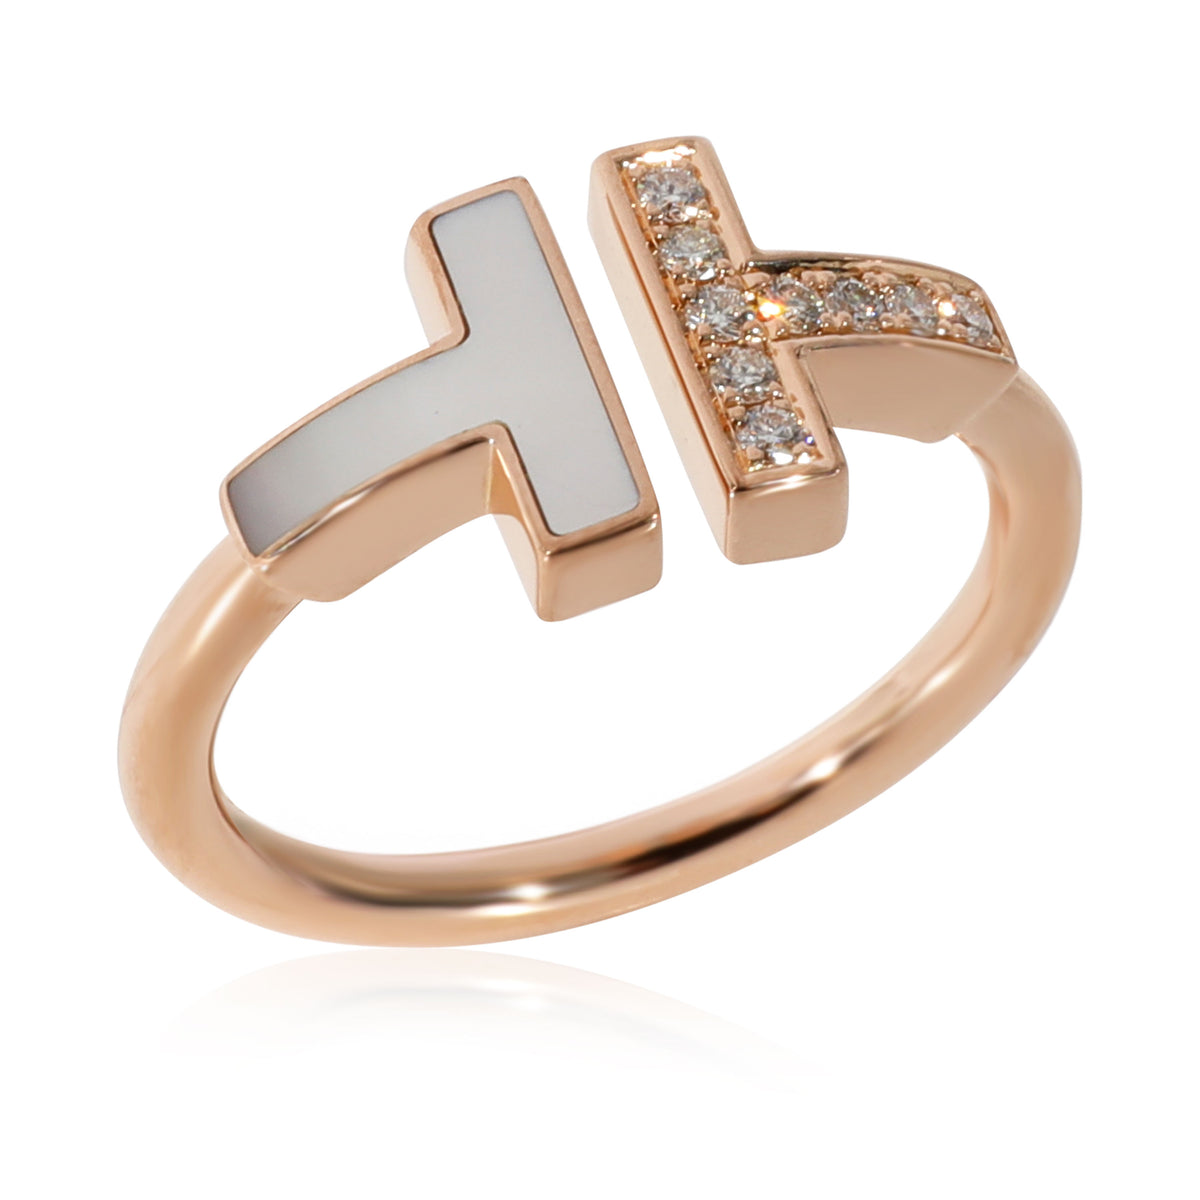 Tiffany T Wire Ring with Diamonds and Mother of Pearl in 18k Rose Gold 0.07 CTW